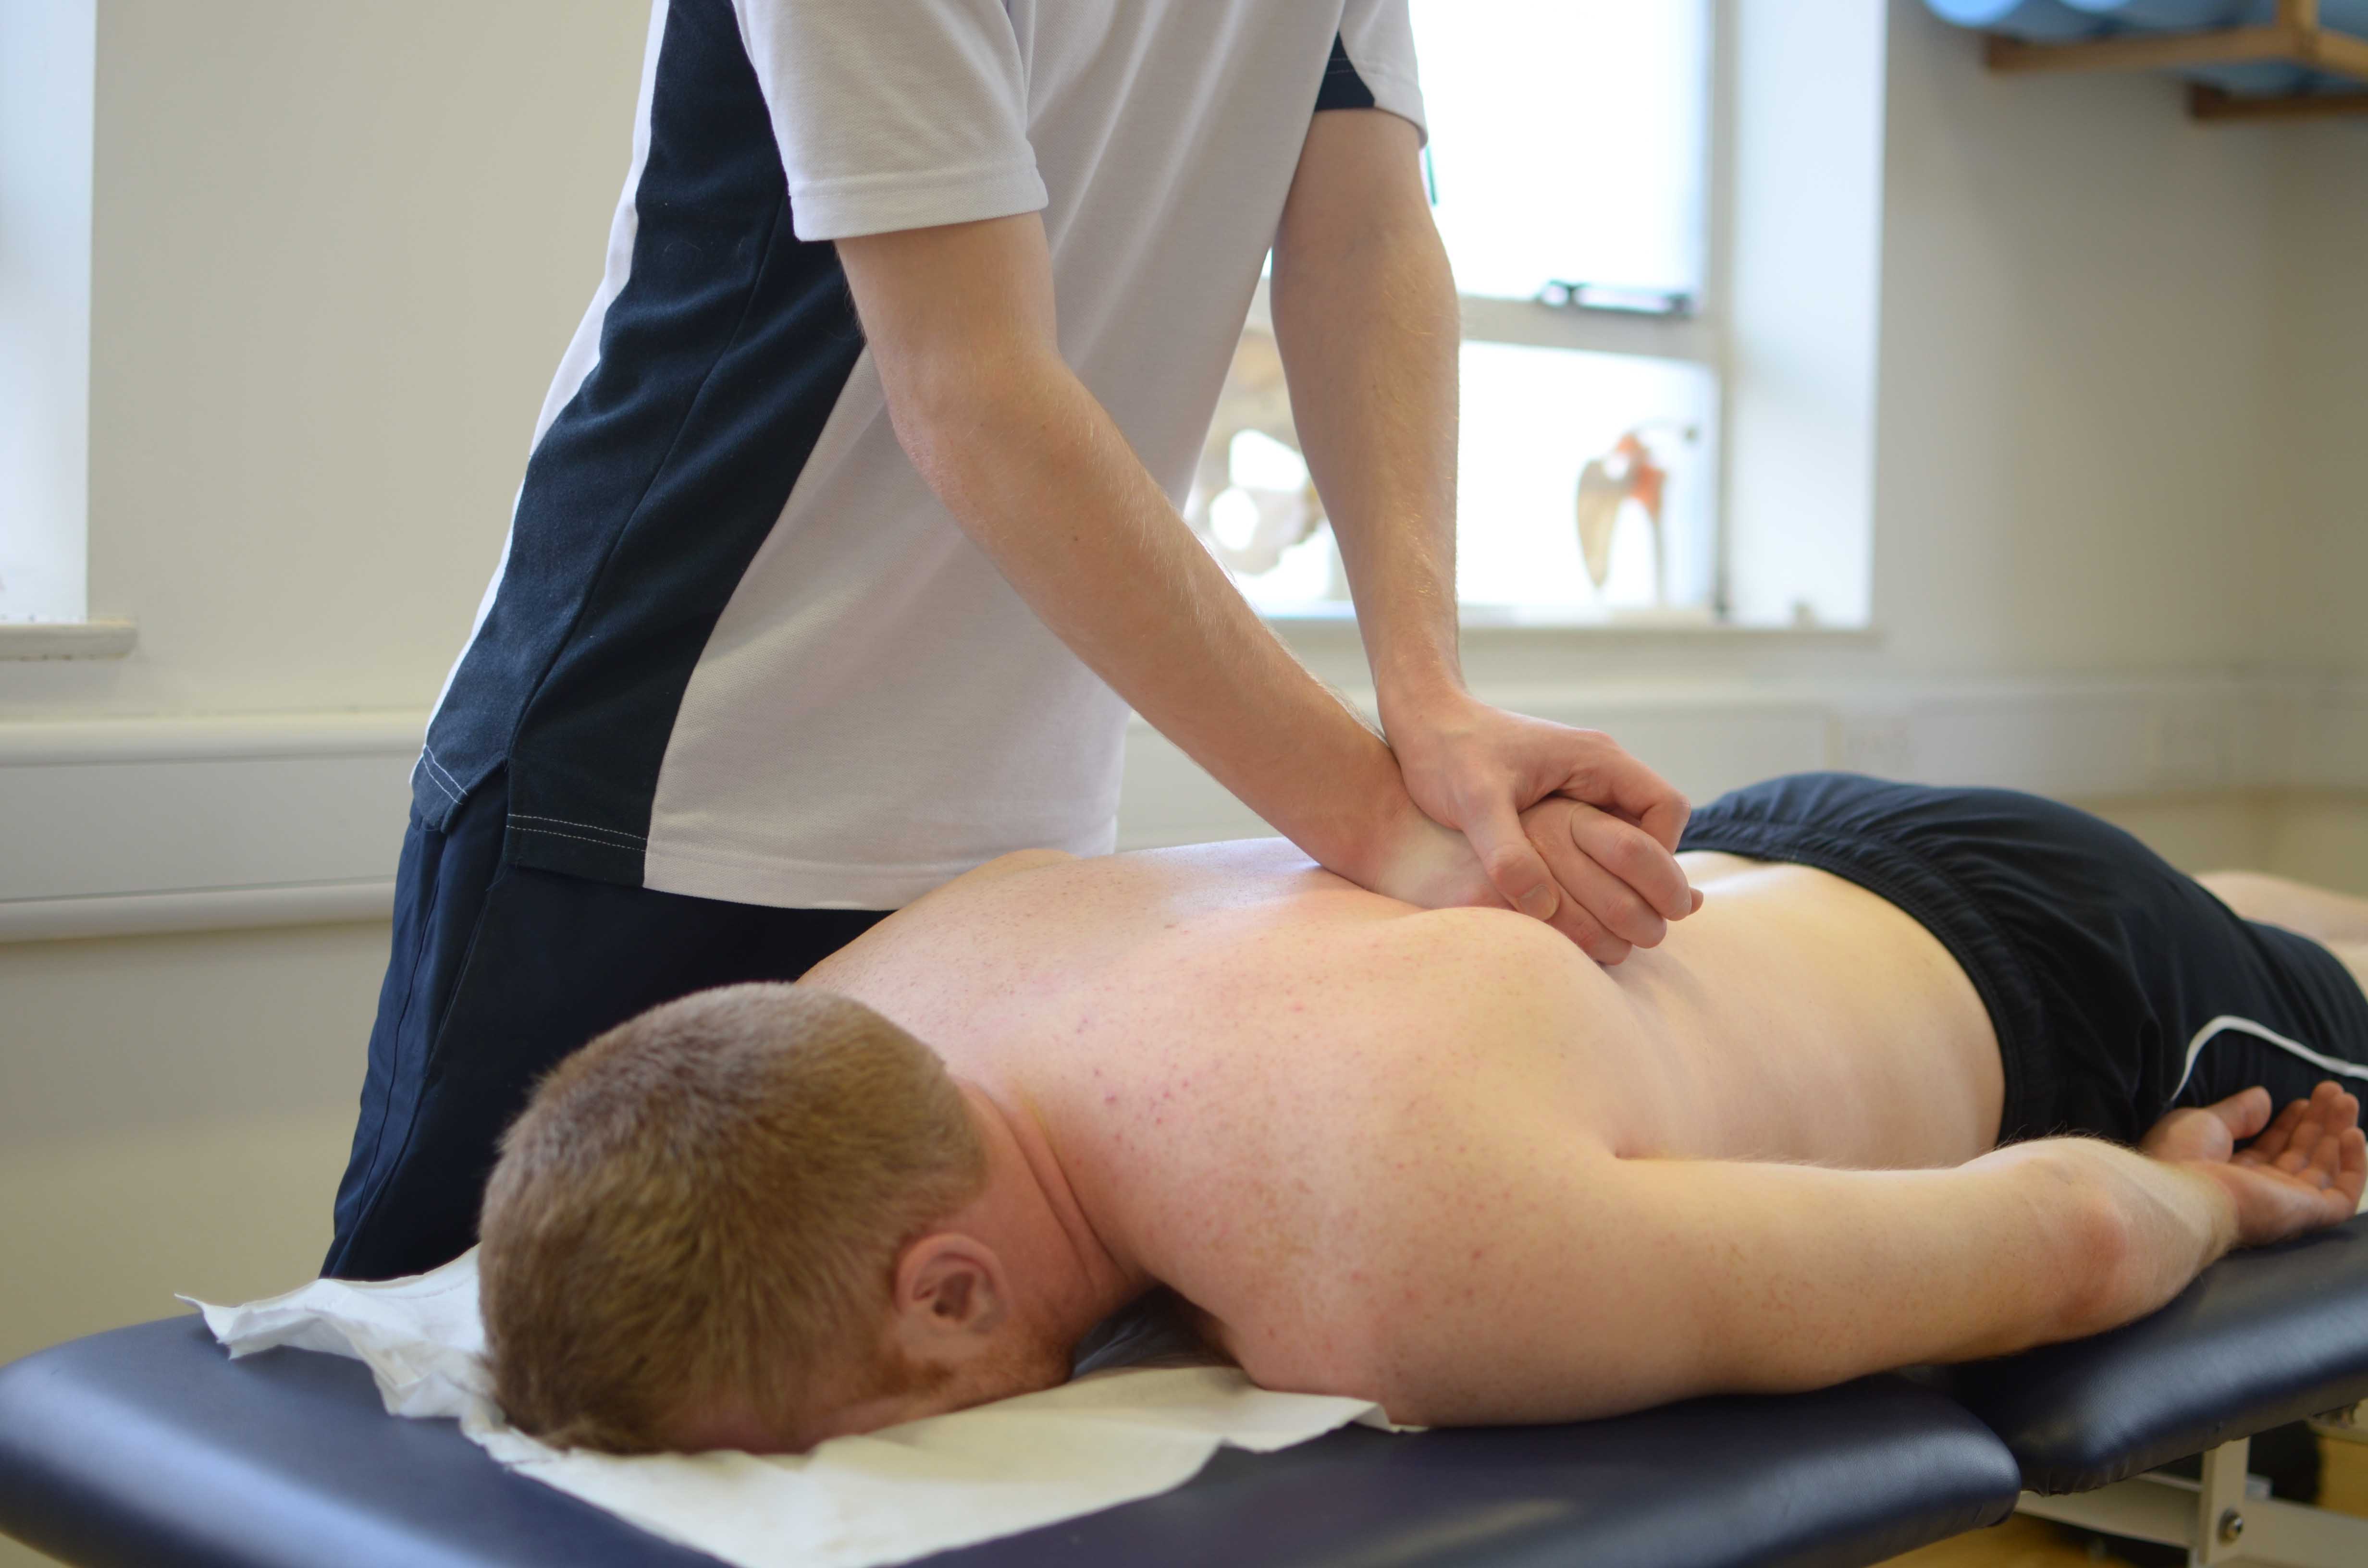 mobilisations of the upper thoracic spine by experienced physiotherapist